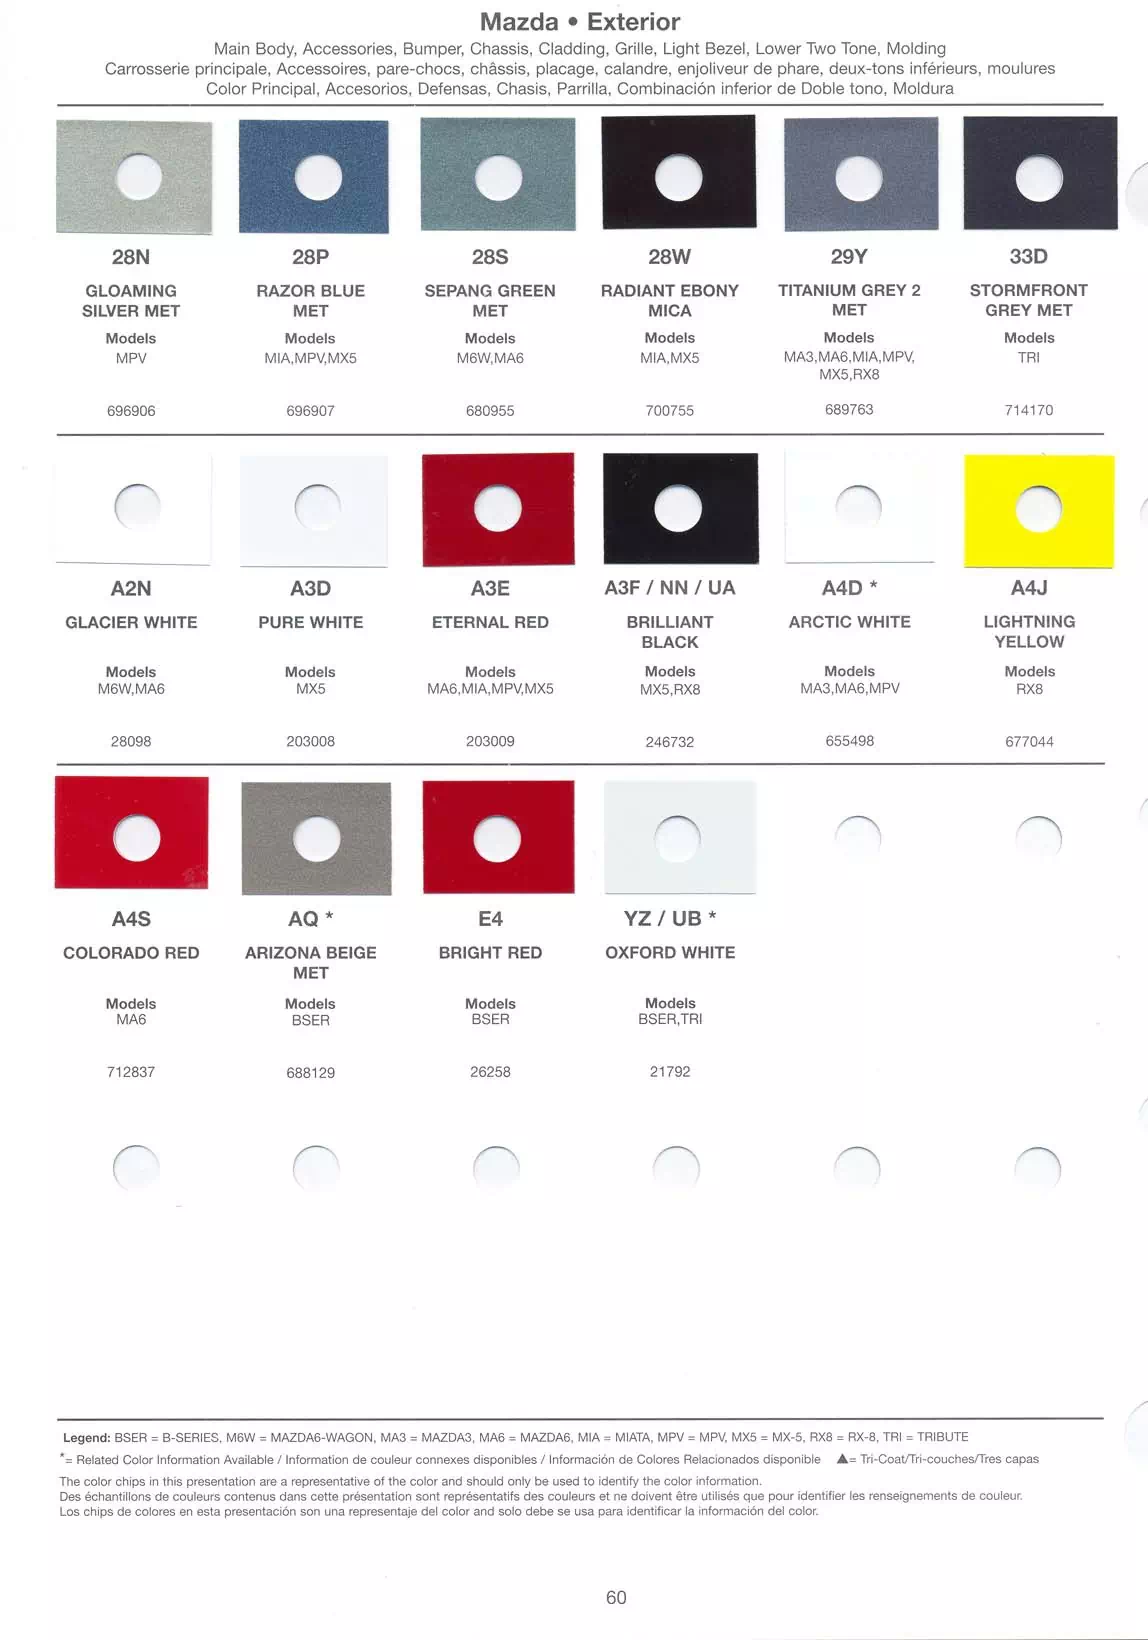 oem paint swatches (chart) paint codes and color names for all 2005 Mazda Vehicles